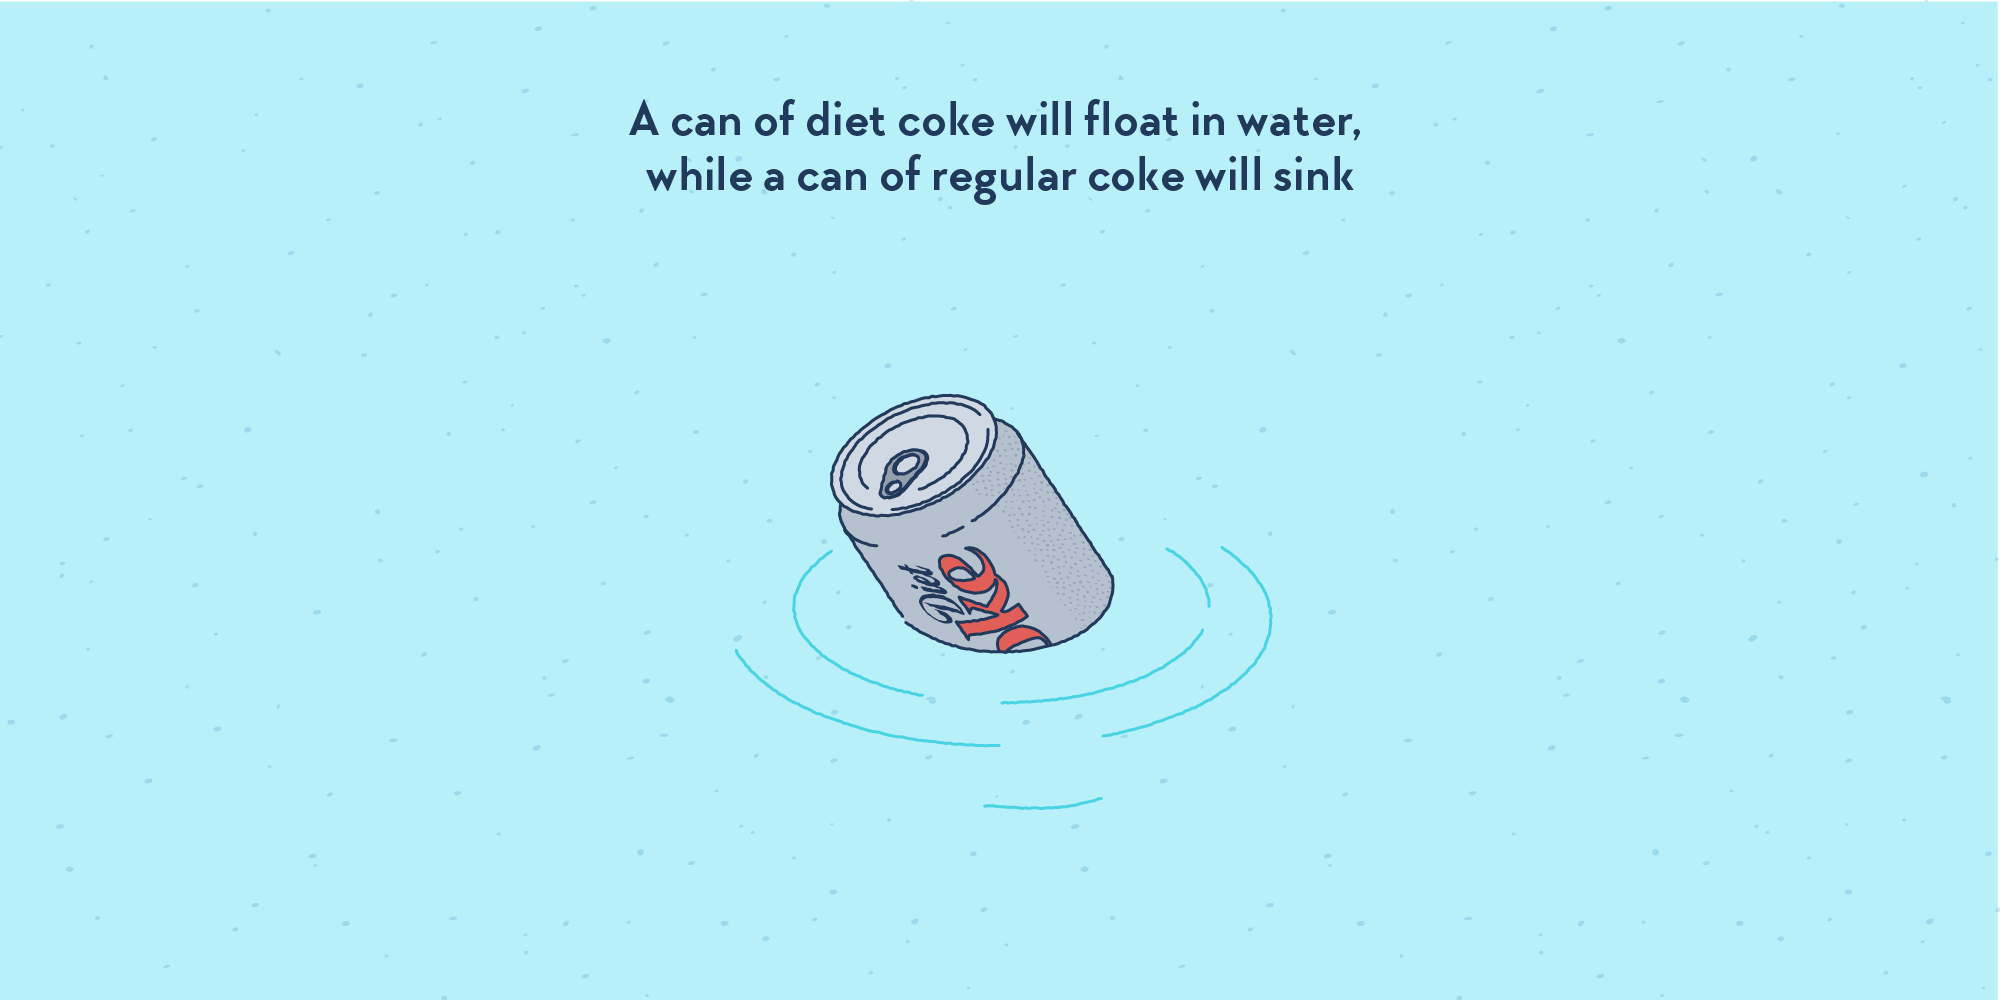 A can of diet Coca-Cola, floating in water